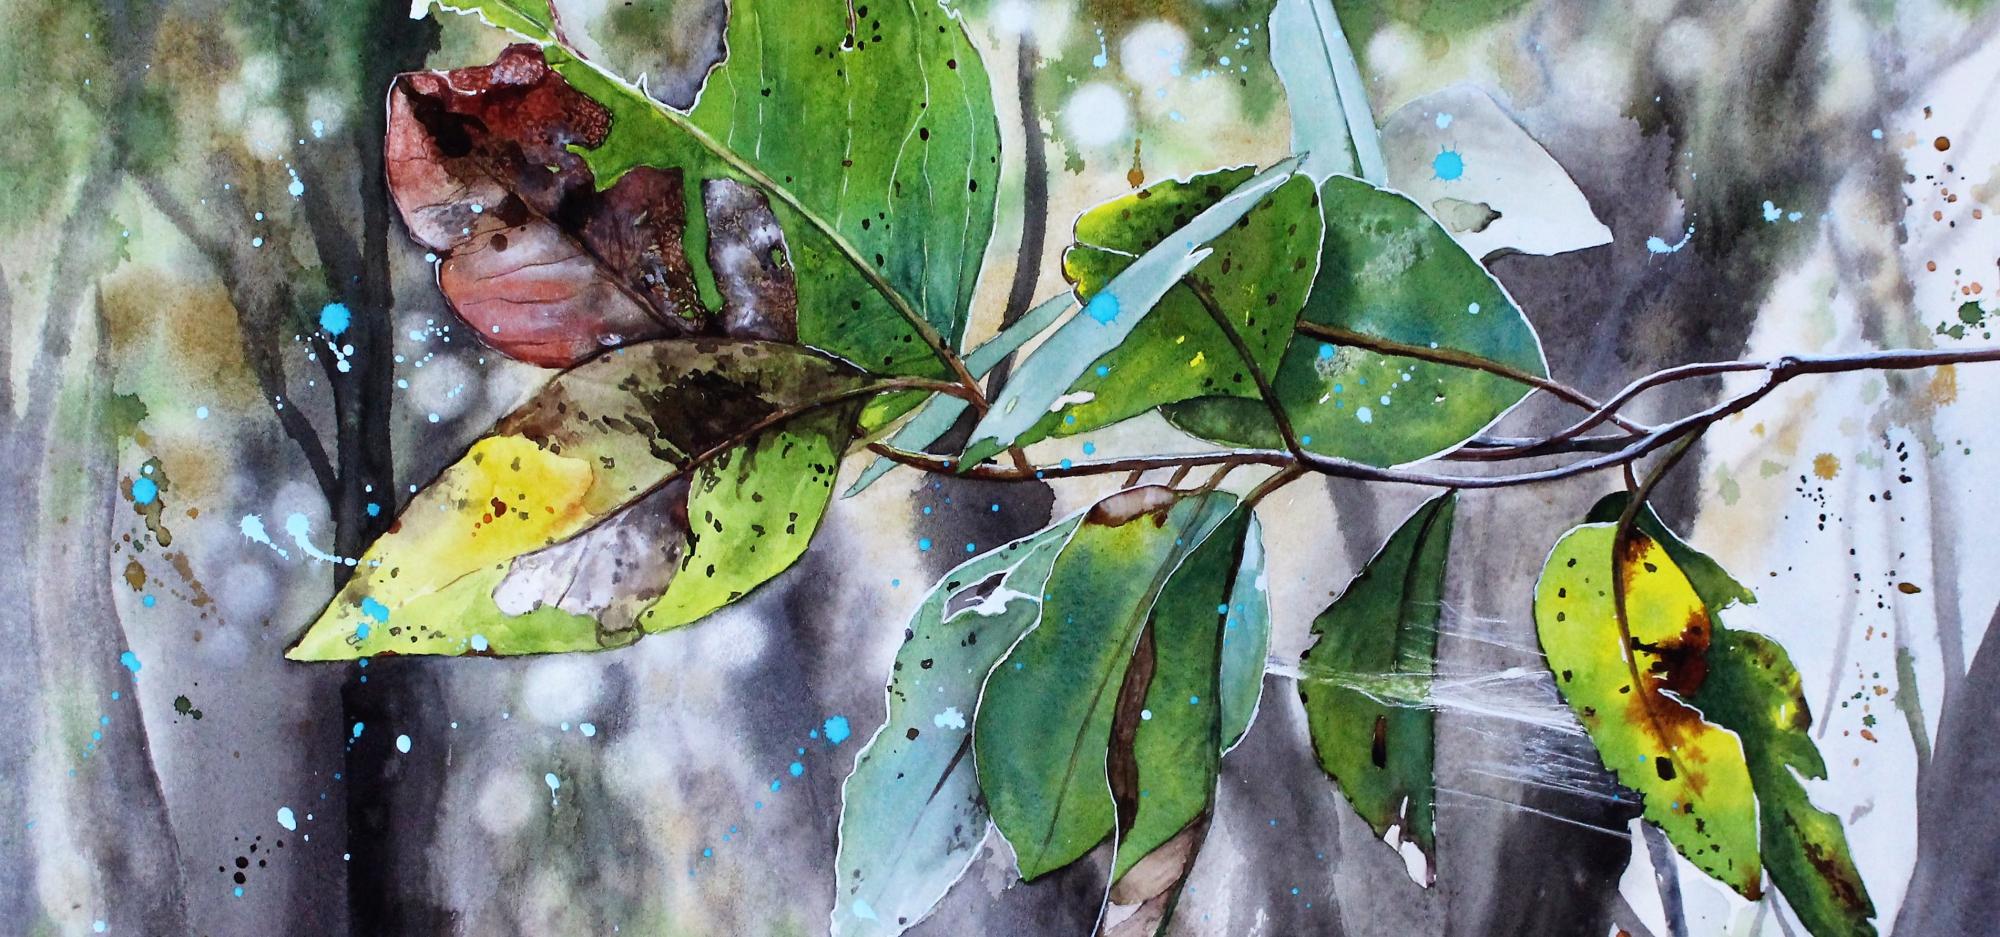 Home Among the Gum Leaves, Renata Wright